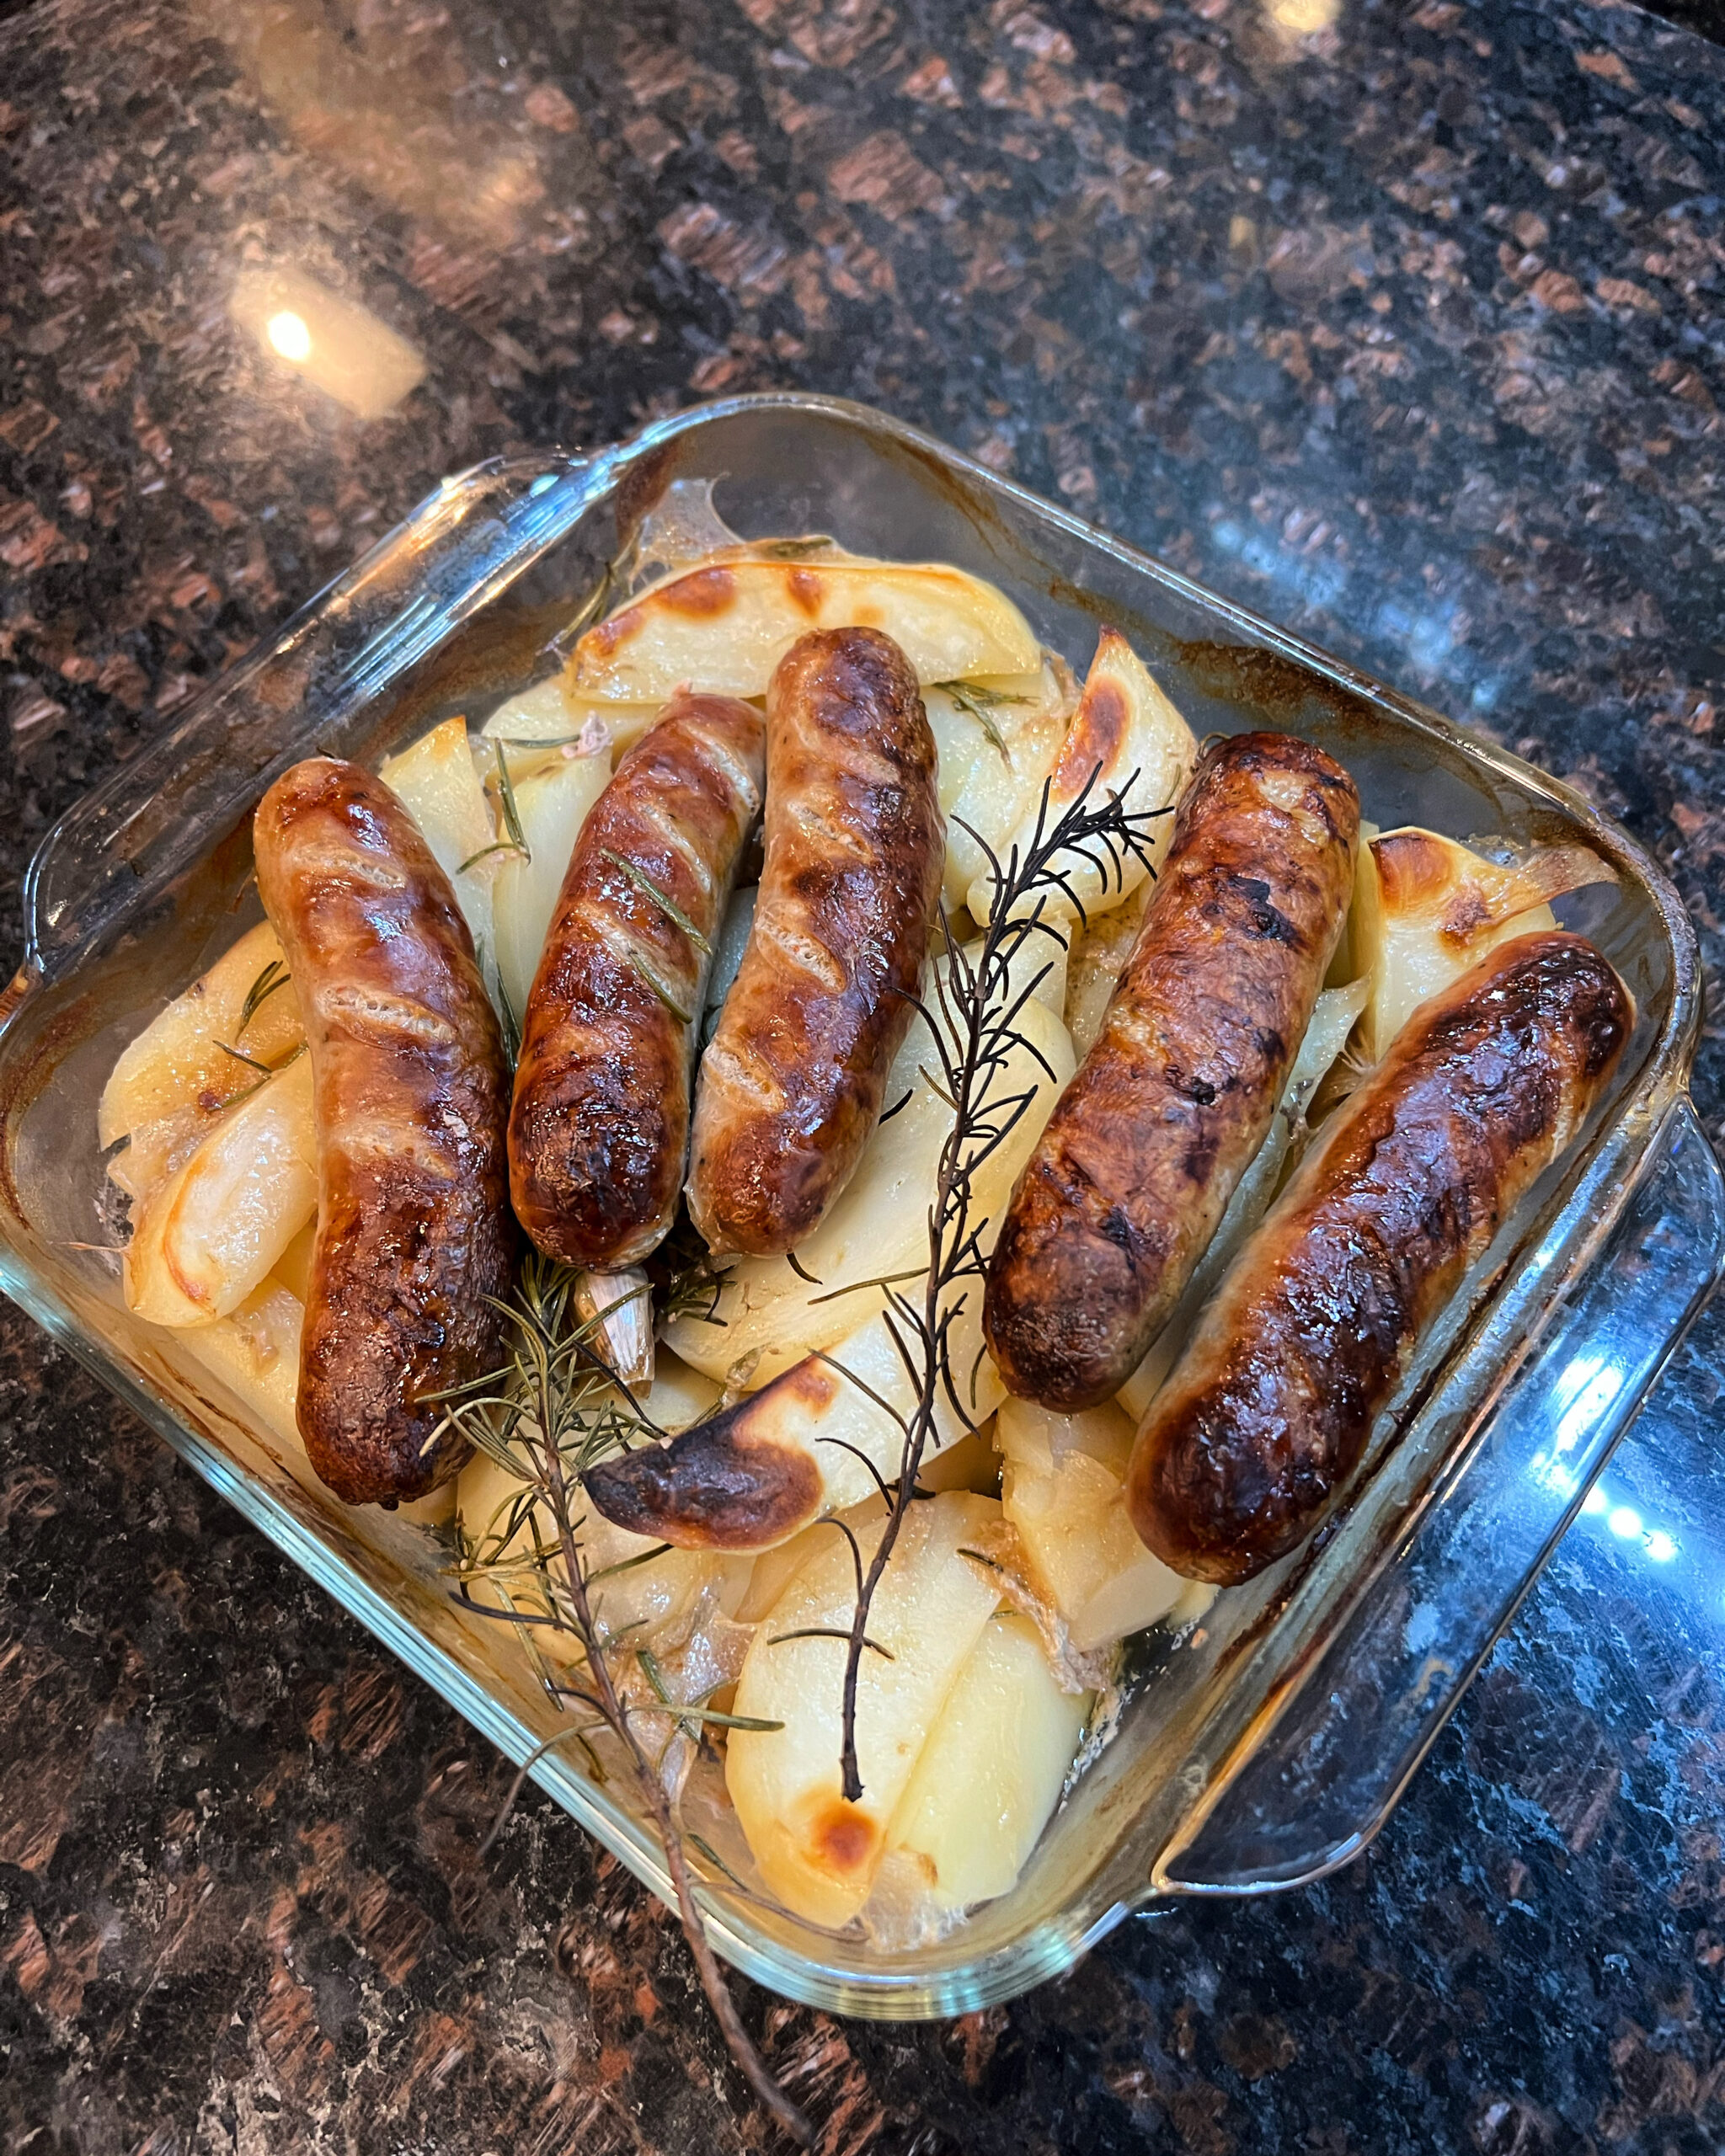 Sausages and Potatoes with Beer